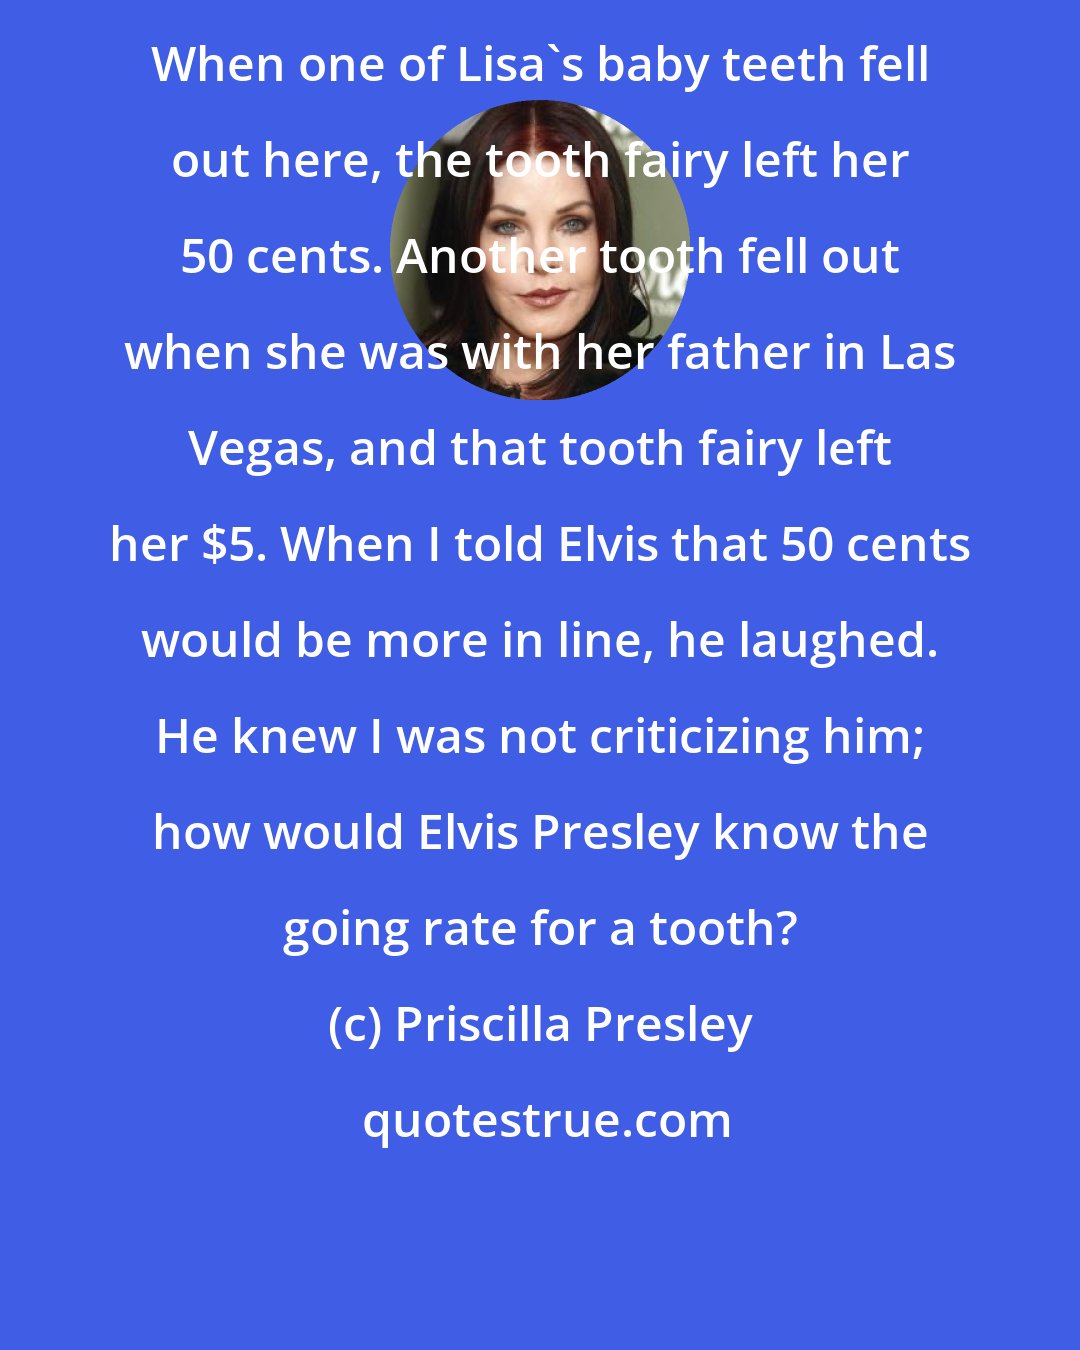 Priscilla Presley: When one of Lisa's baby teeth fell out here, the tooth fairy left her 50 cents. Another tooth fell out when she was with her father in Las Vegas, and that tooth fairy left her $5. When I told Elvis that 50 cents would be more in line, he laughed. He knew I was not criticizing him; how would Elvis Presley know the going rate for a tooth?